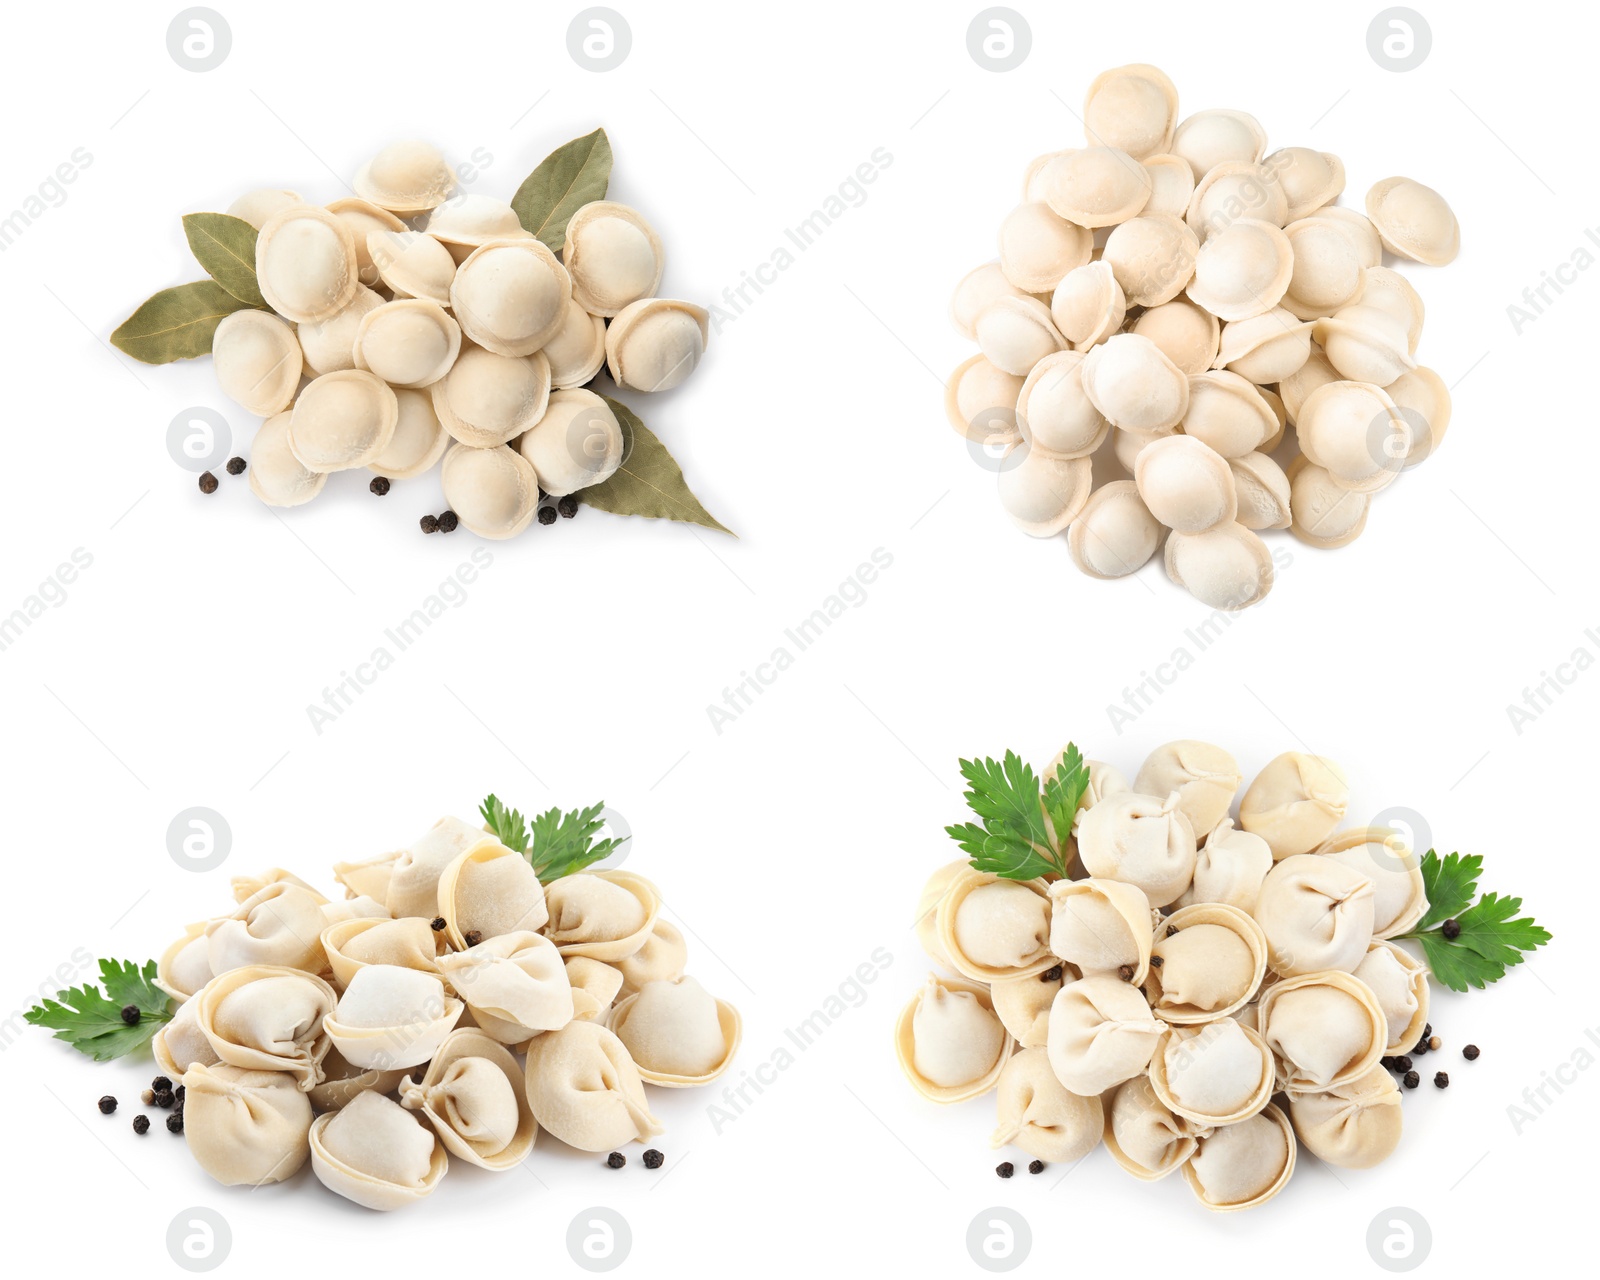 Image of Set of uncooked dumplings isolated on white